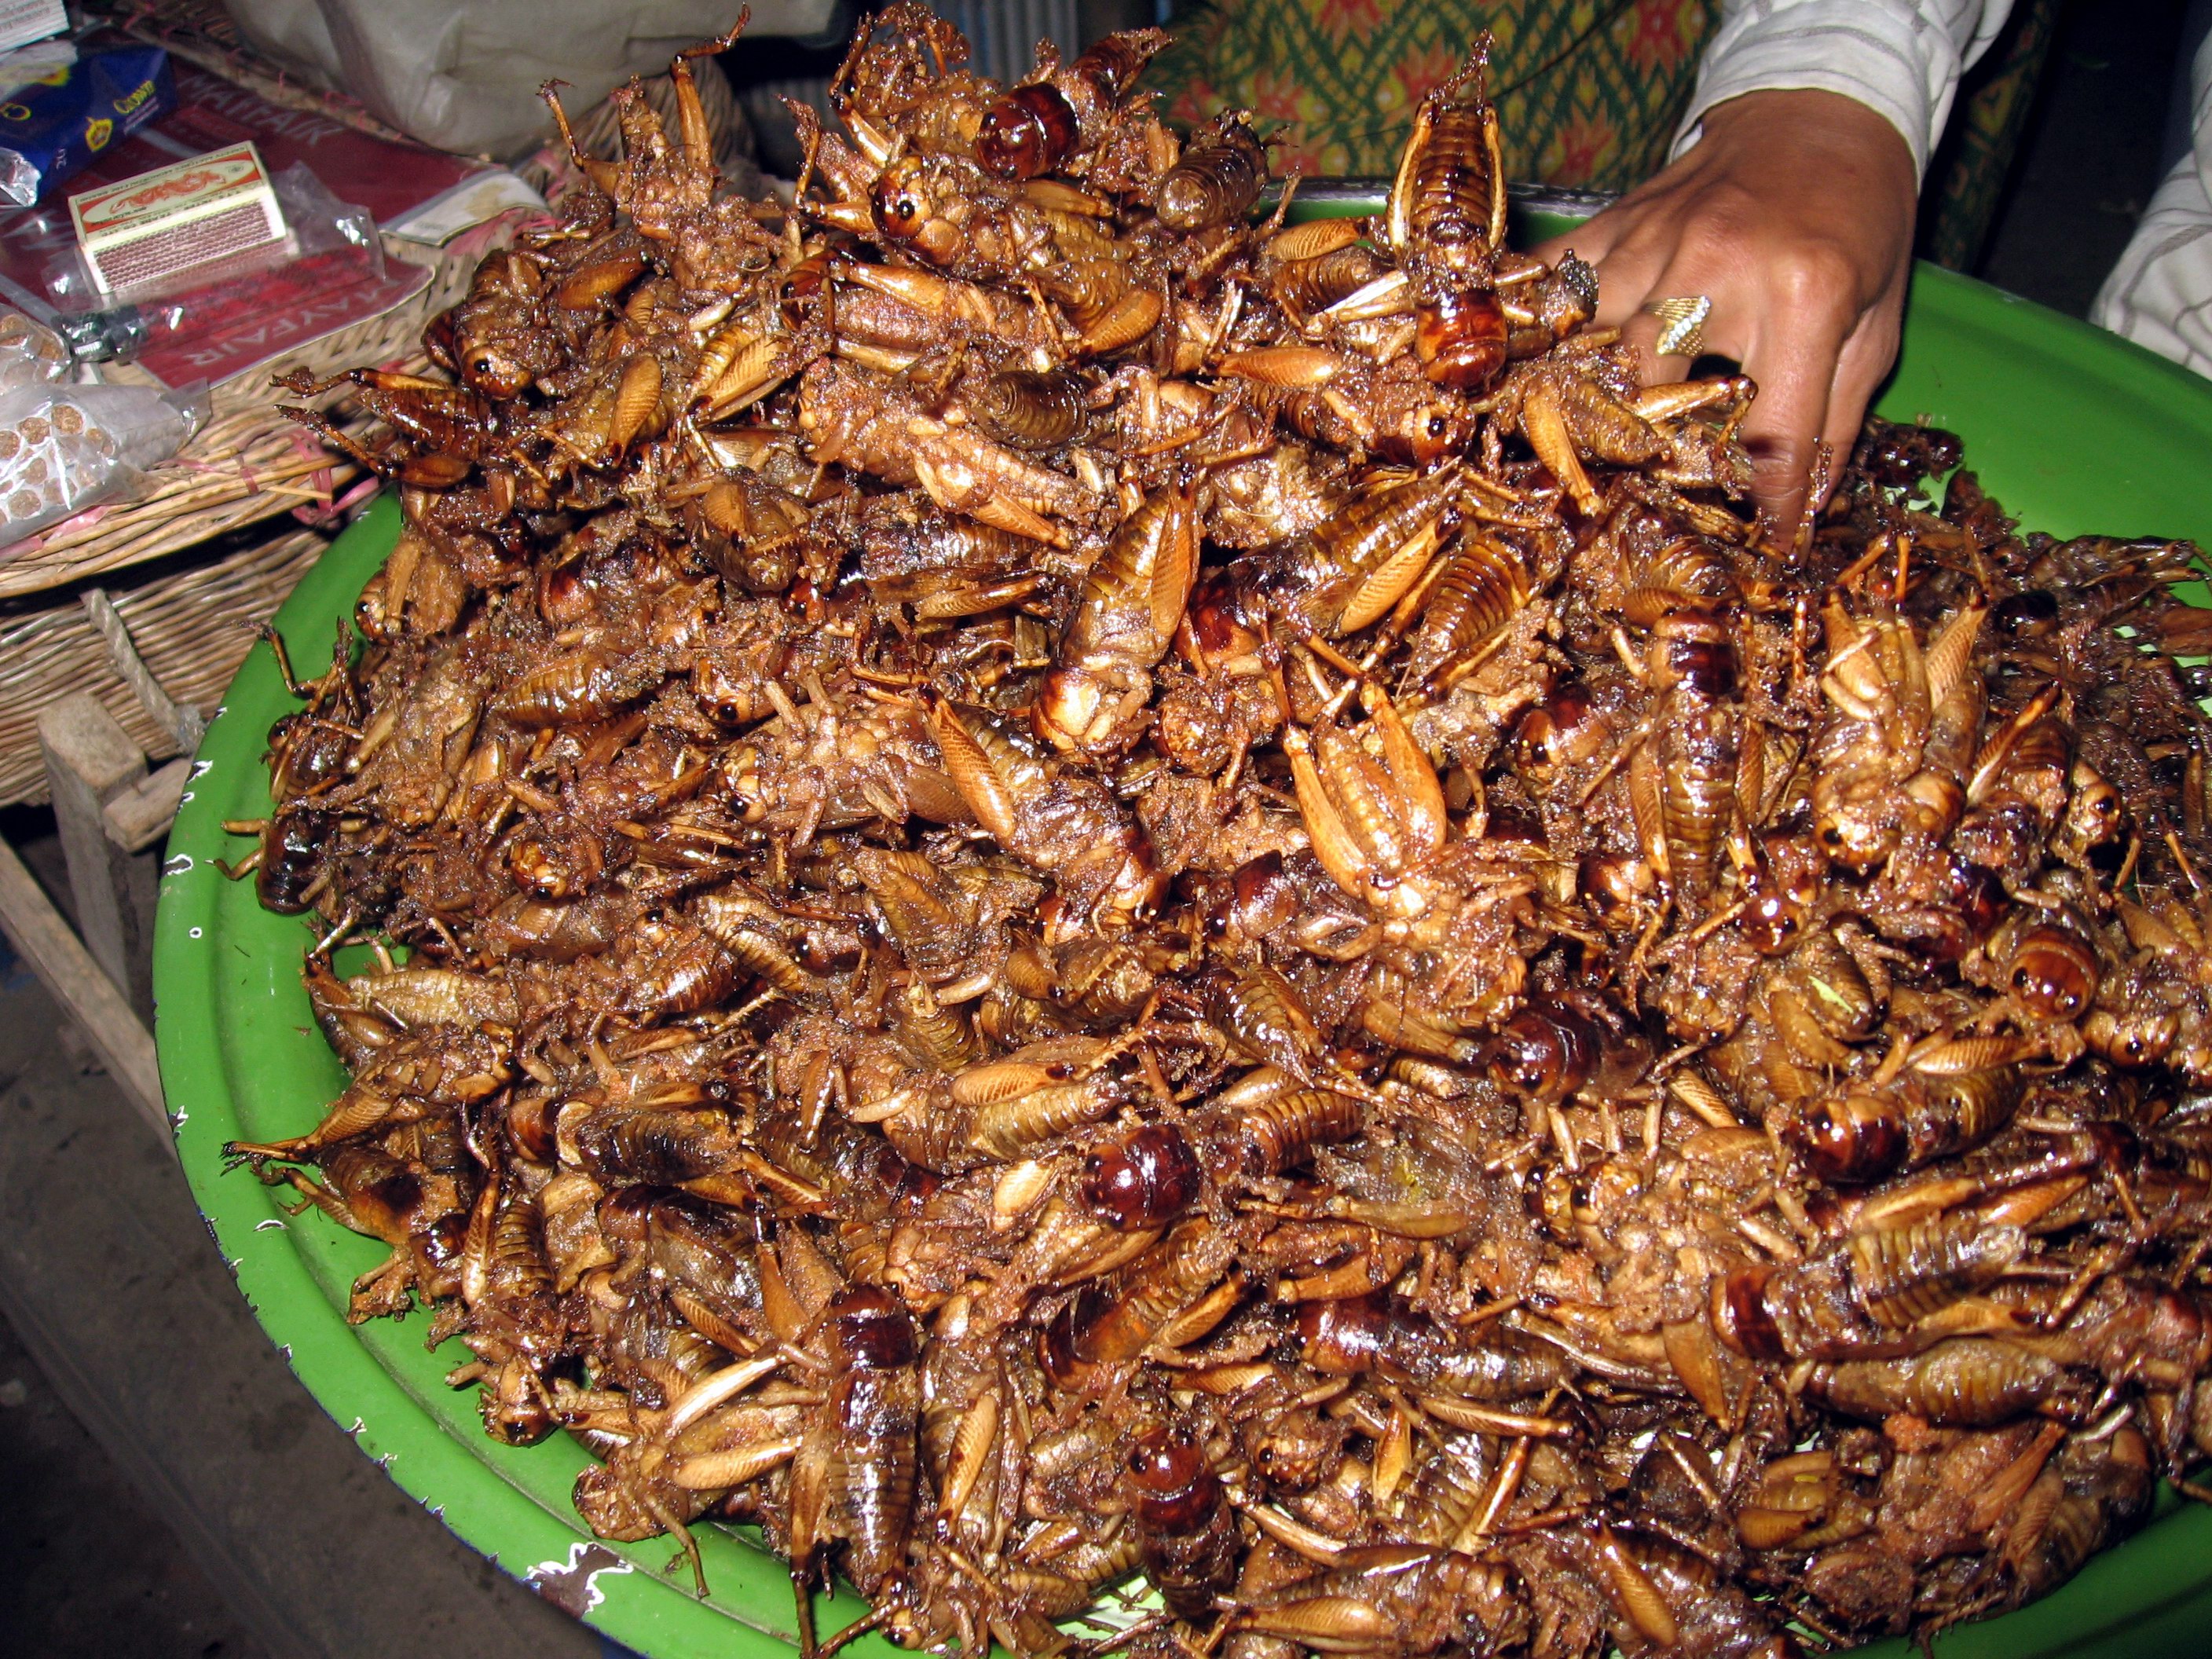 Eating insects can be good for the planet – Europeans should eat more of them